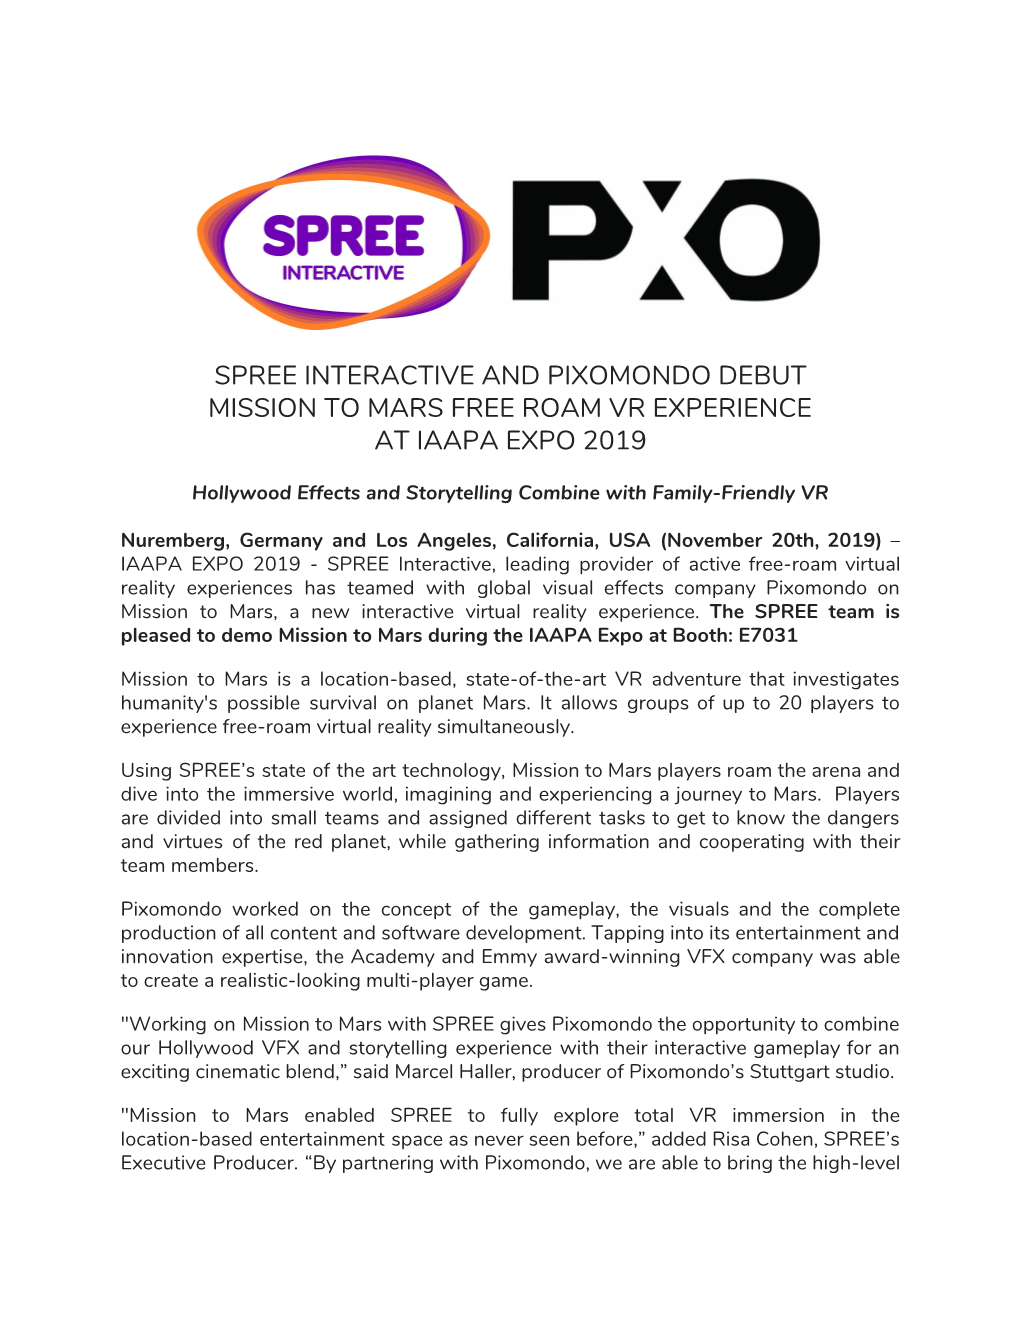 Spree Interactive and Pixomondo Debut Mission to Mars Free Roam Vr Experience at Iaapa Expo 2019